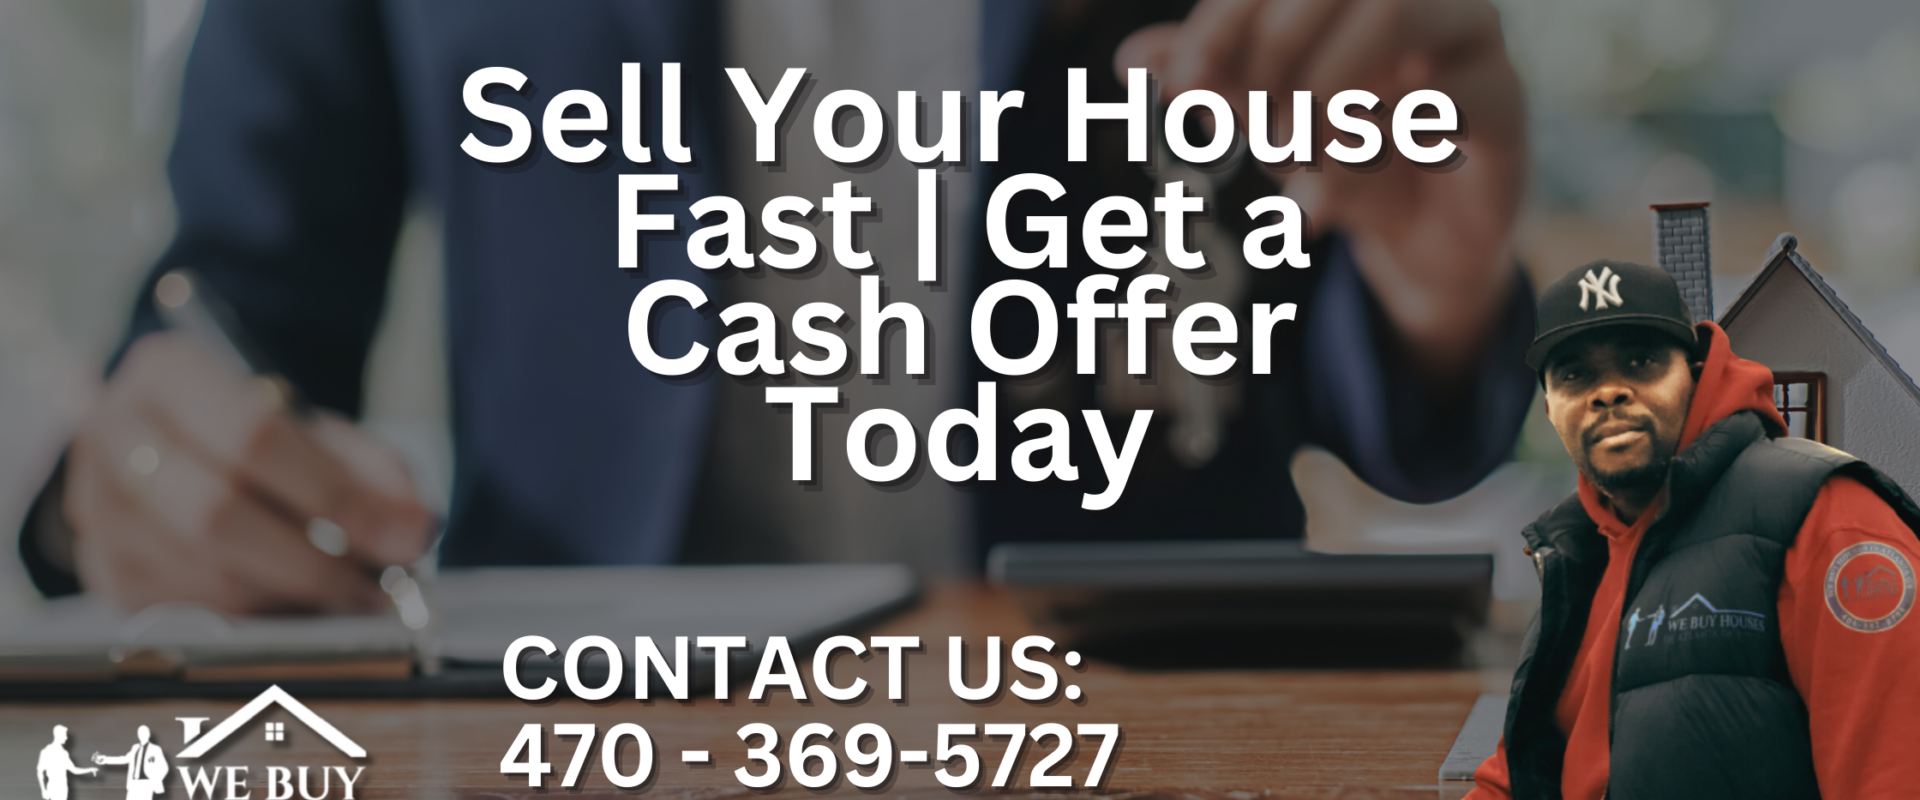 Sell-Your-House-Fast-Get-a-Cash-Offer-Today